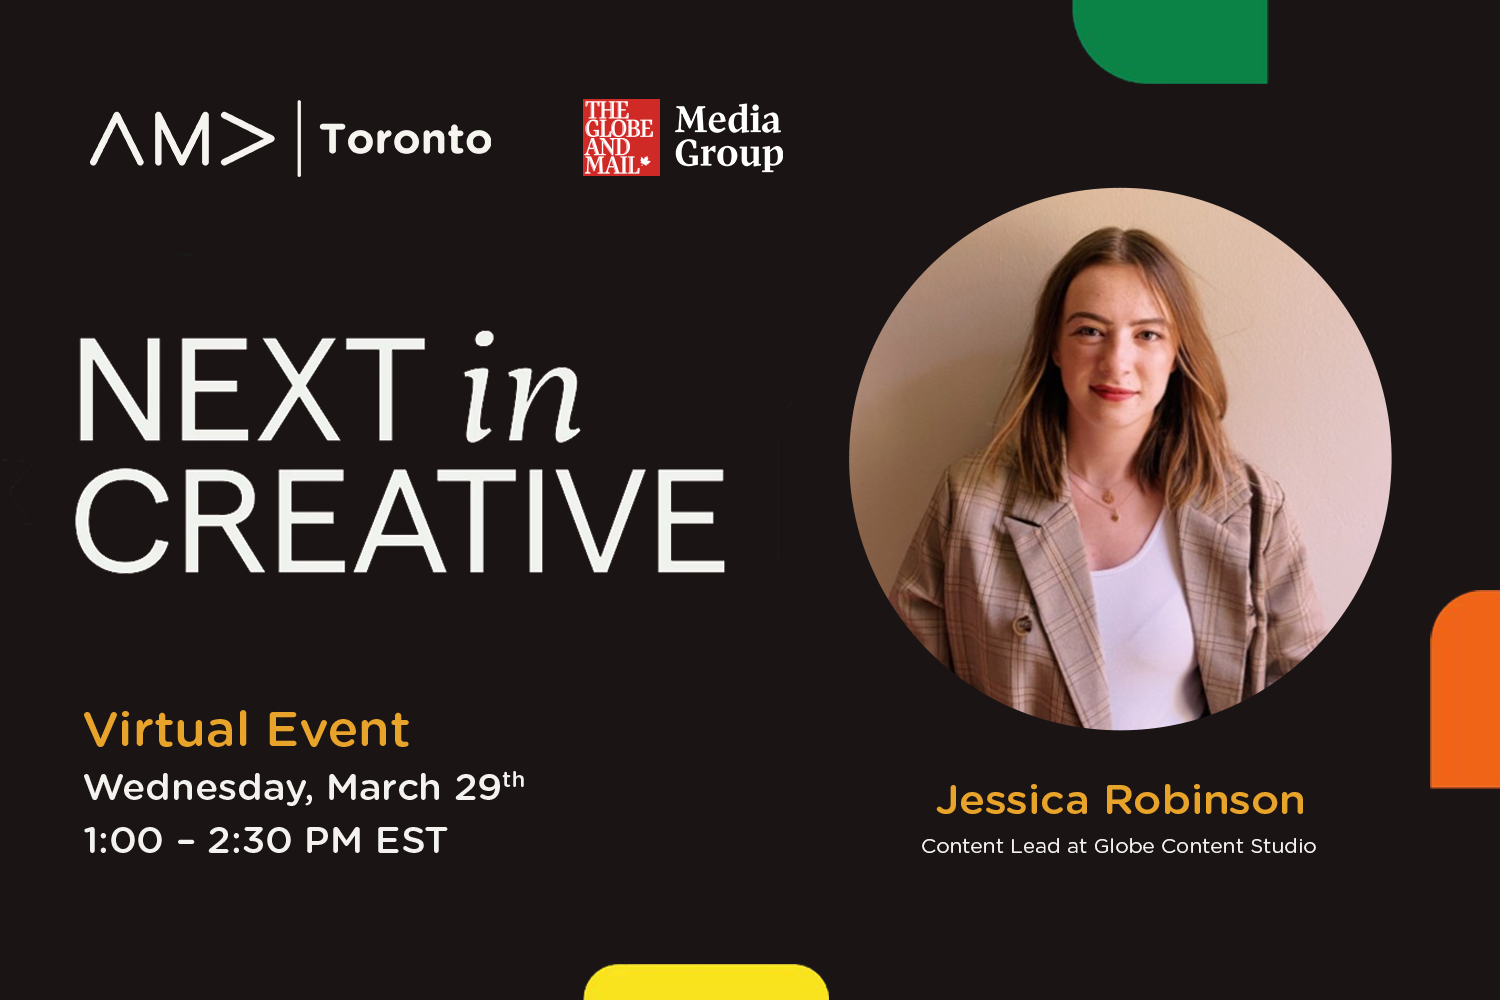 American Marketing Association – Toronto Virtual Event. NEXT IN CREATIVE - Globe & Mail (MNG Marketing Event). Mar 29, 2023, 1 to 2:30pm. Speaker: Jessica Robinson is the Content Lead at Globe Content Studio, the content marketing division of The Globe and Mail